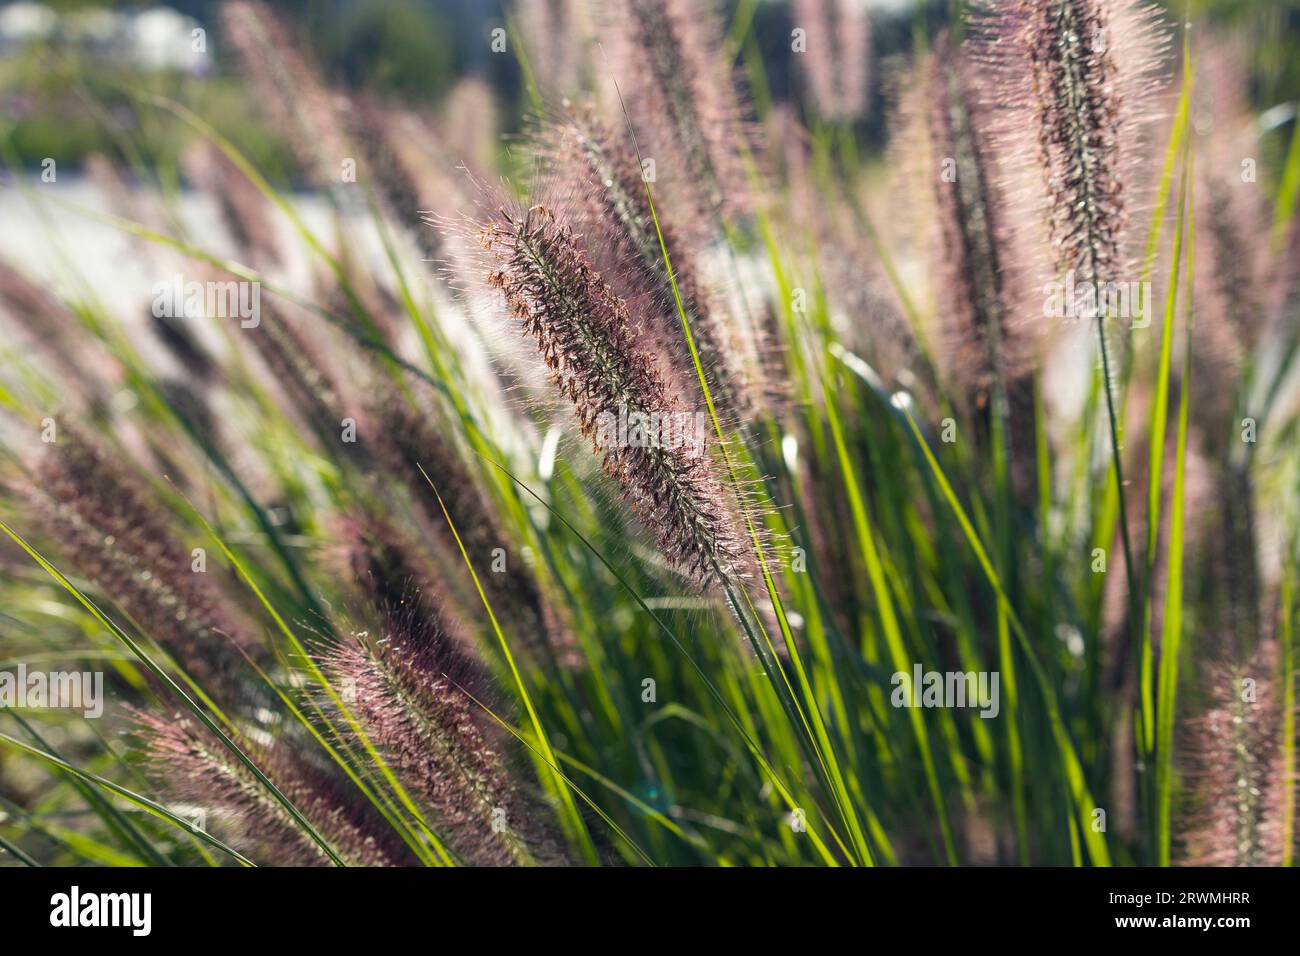 The beautiful red flower spikes of Pennisetum alopecuroides 'Redhead', also known as Fountain grass. Stock Photo